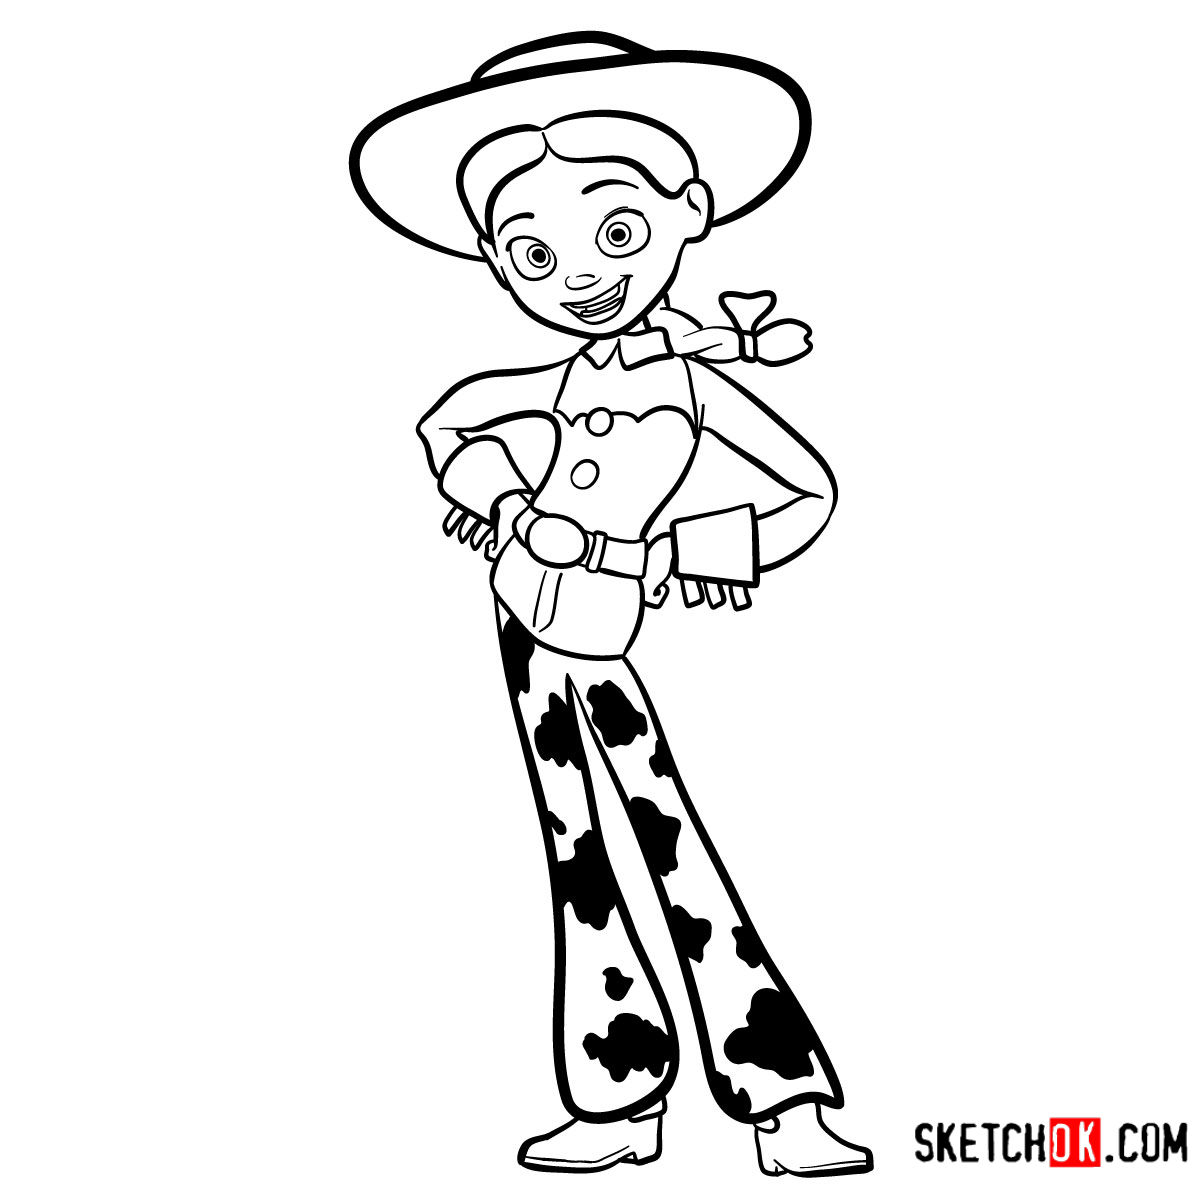 How To Draw Jessie From Toy Story 2 Step By Step Drawing Tutorials